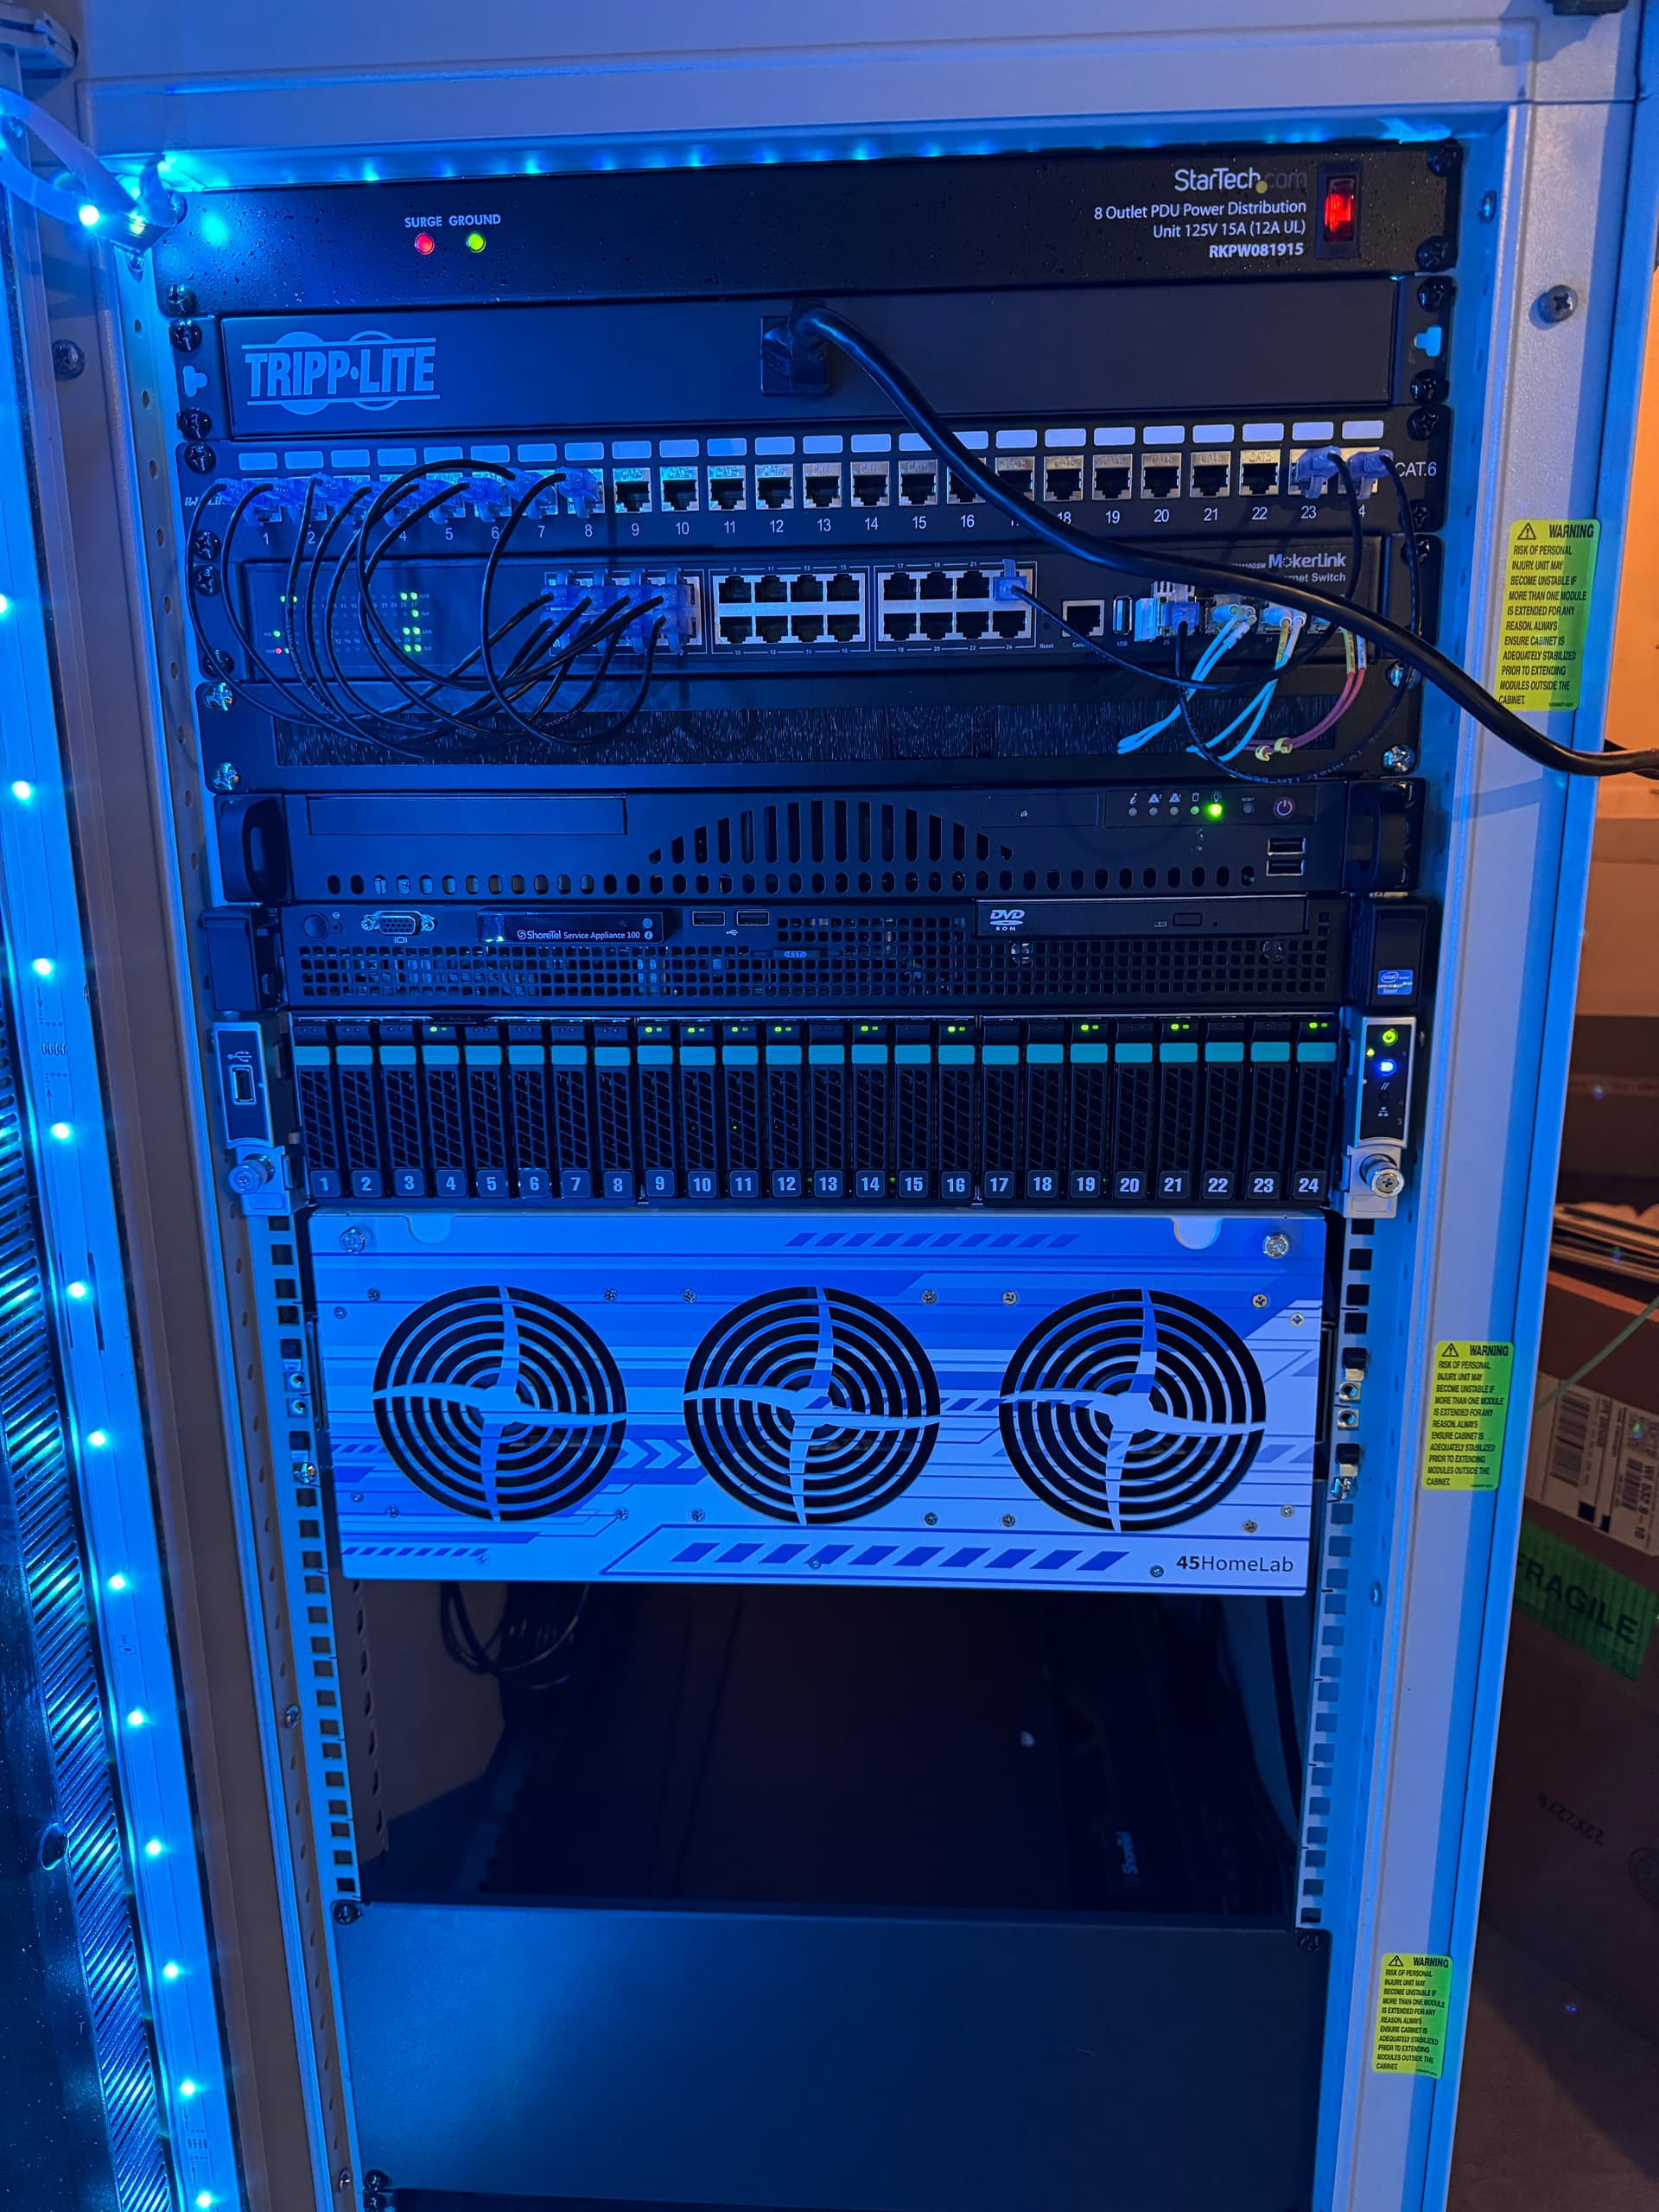 Looking for a 19 Rack Deployment?